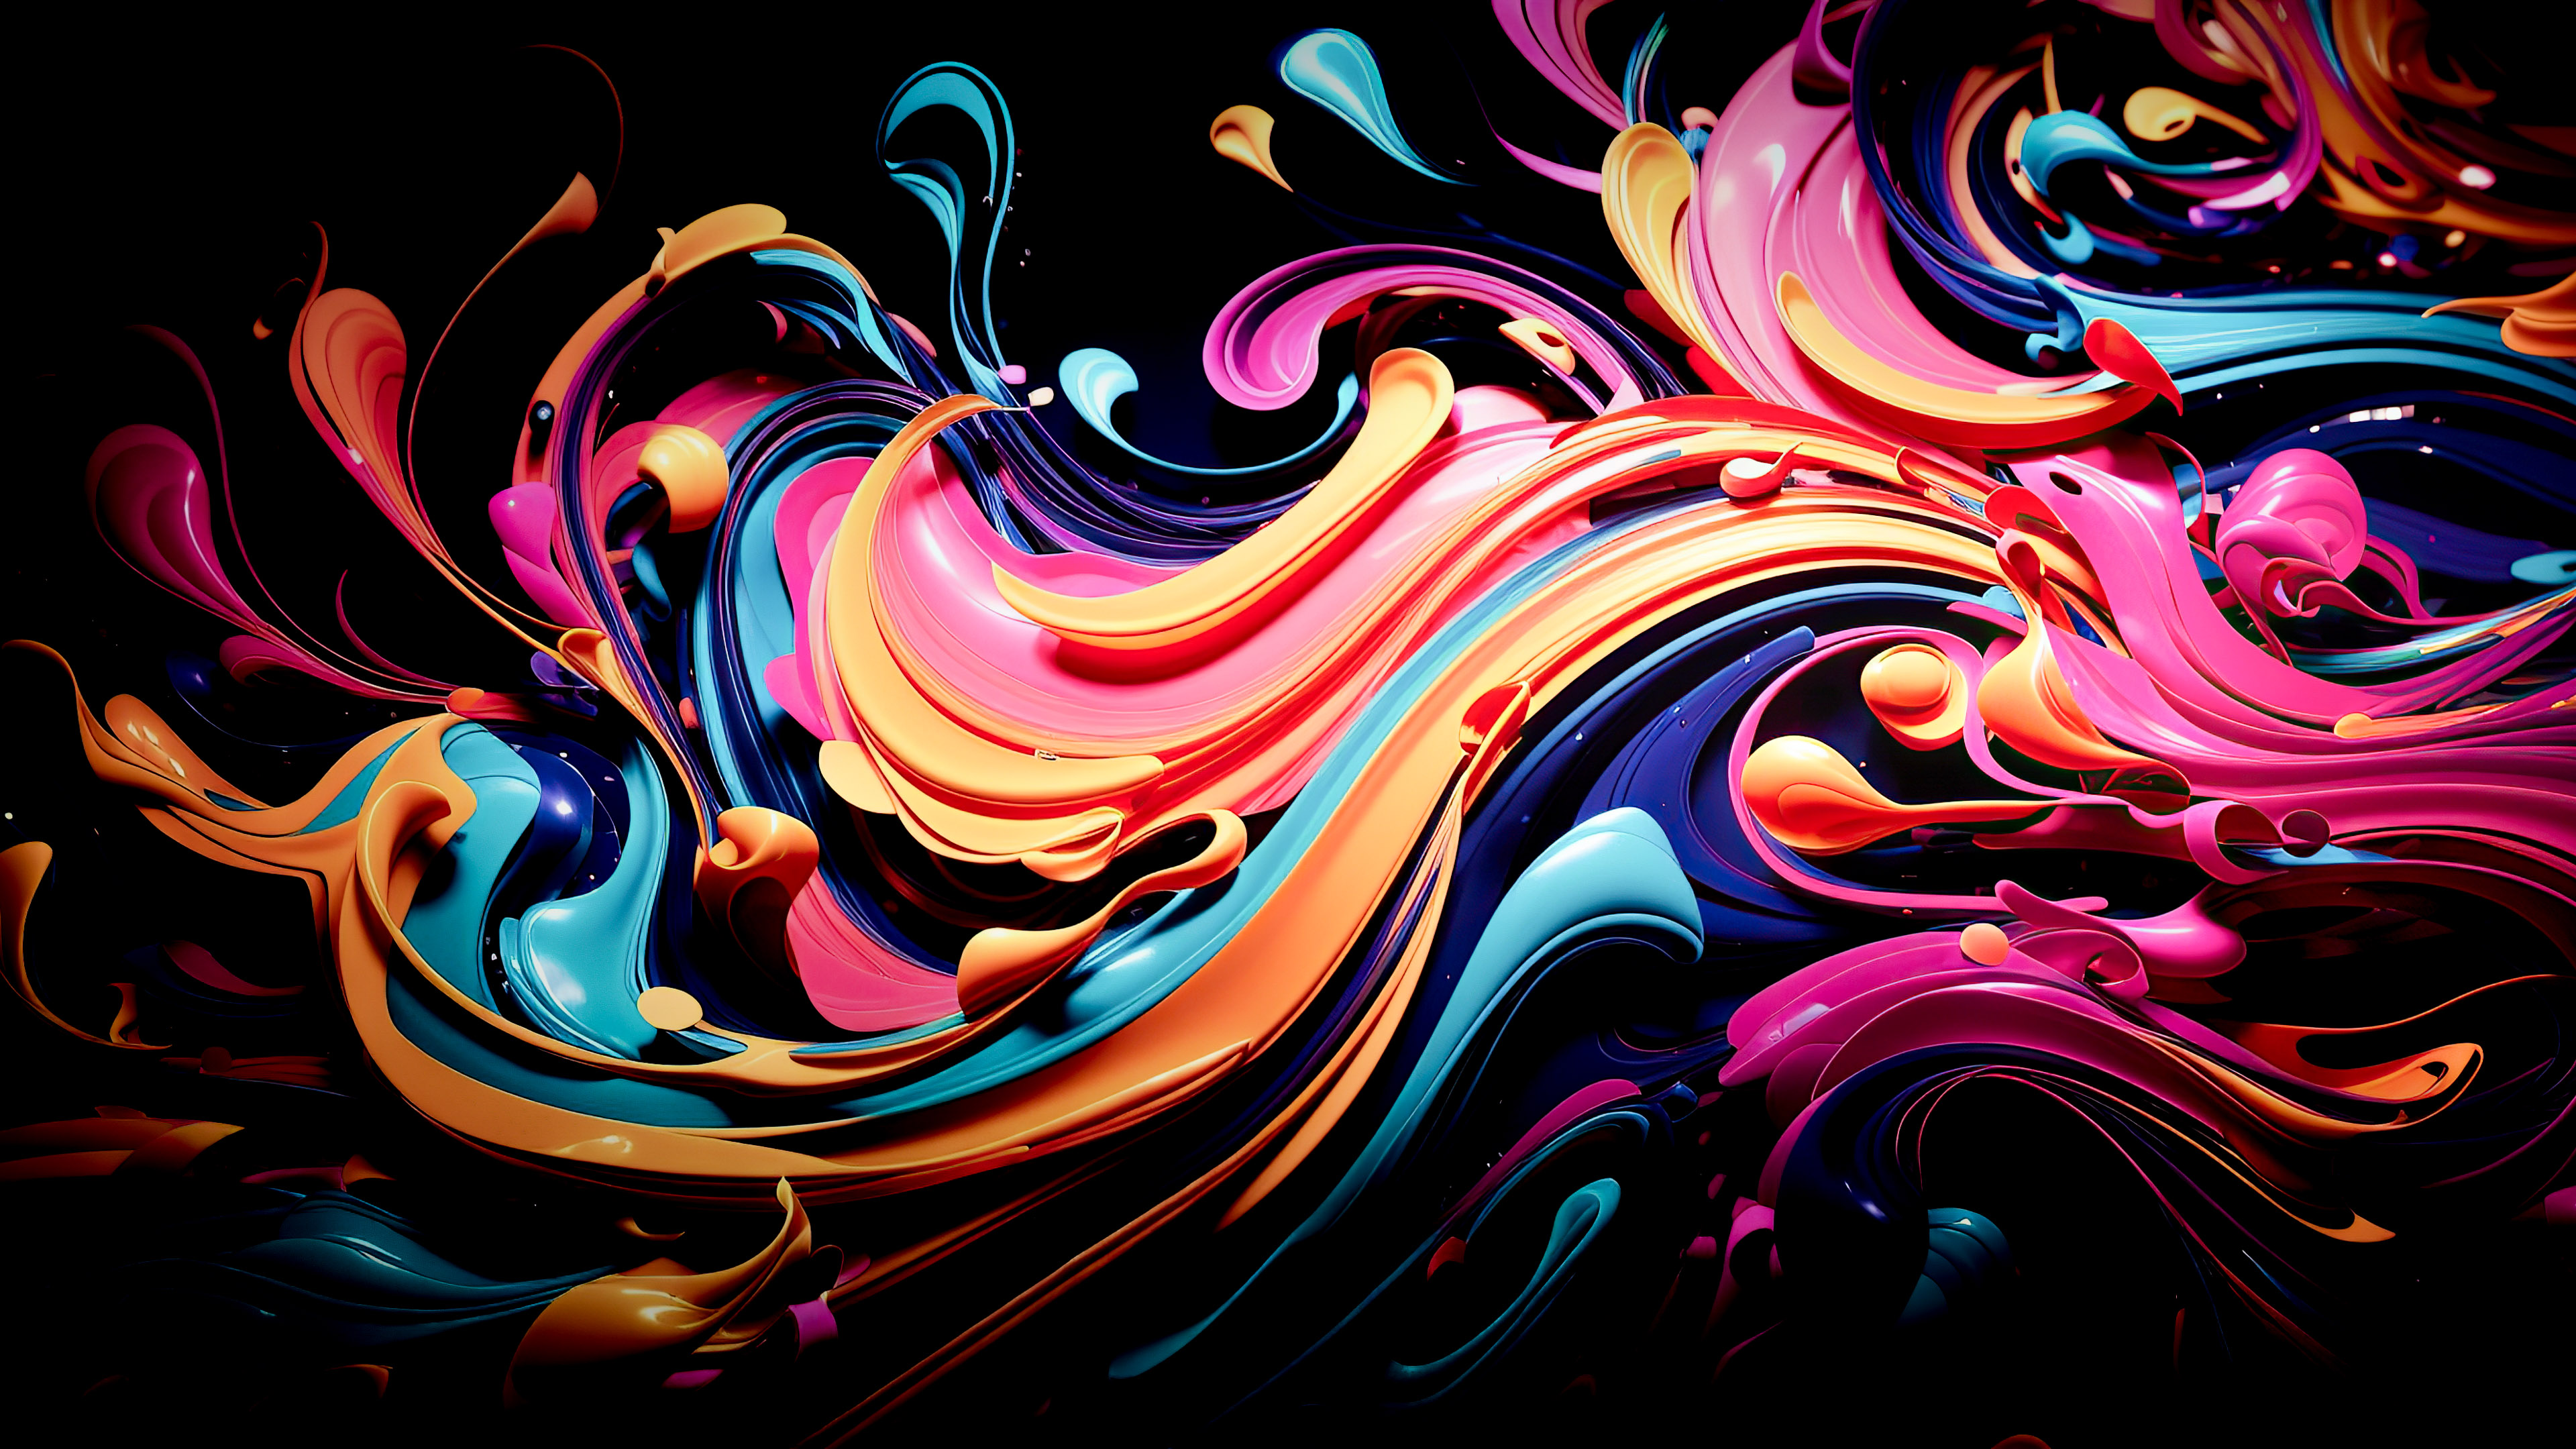 Experience the dynamic energy of dark abstract wallpaper 4K, adorned with vibrant swirls of neon colors.